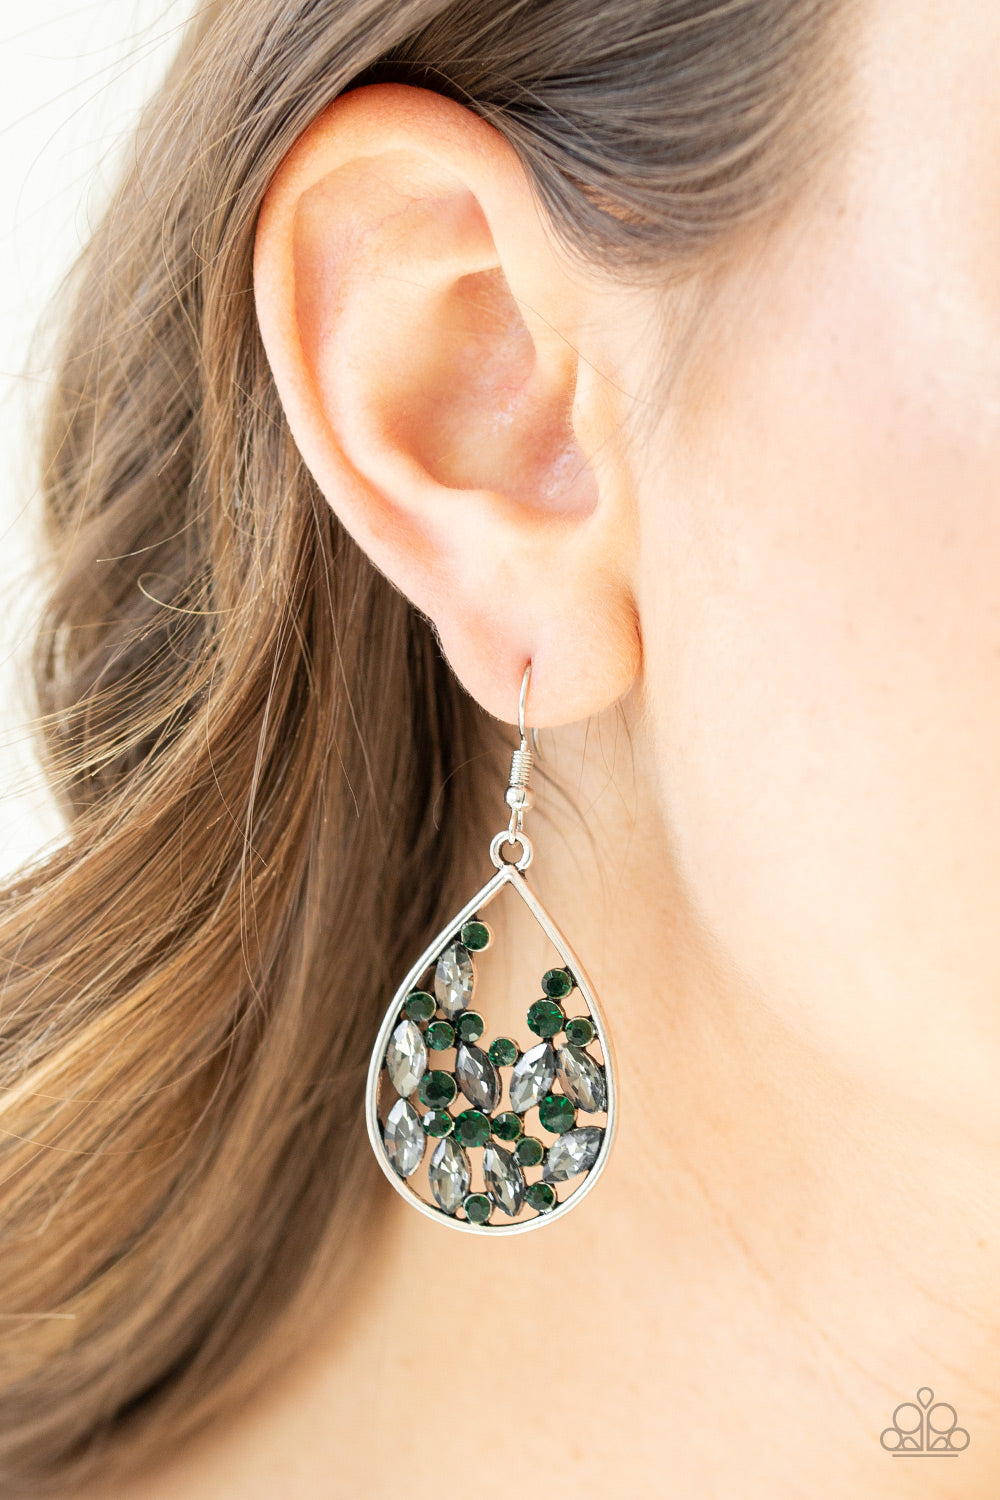 Paparazzi ♥ Cash or Crystal? - Green ♥  Earrings